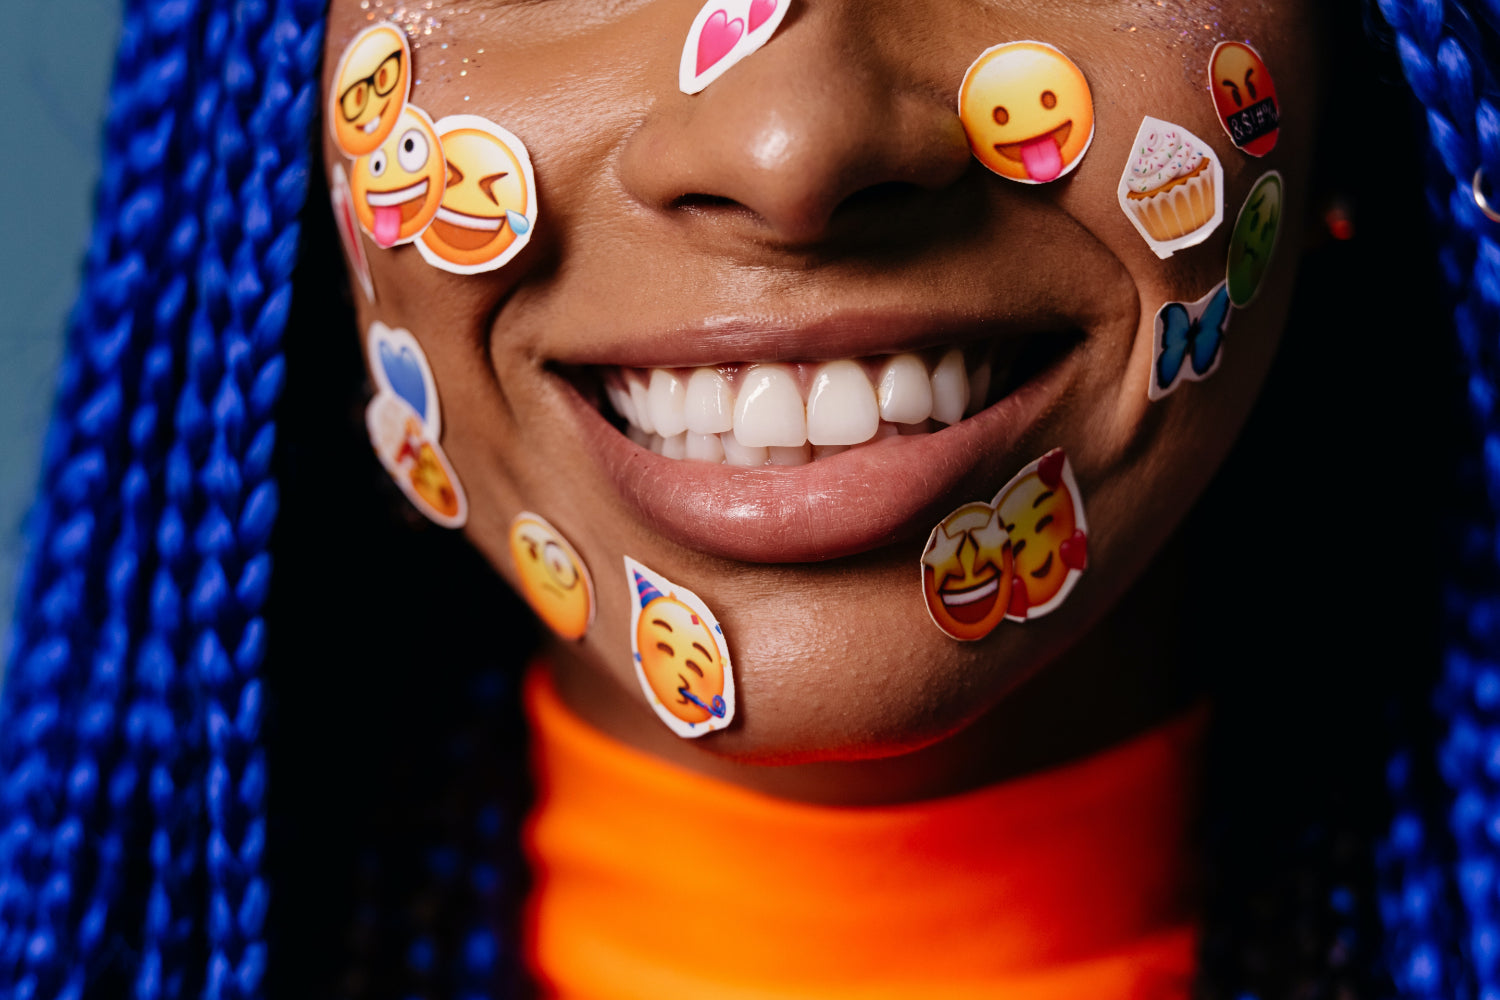 Woman with blue braids wears emoji stickers on her face